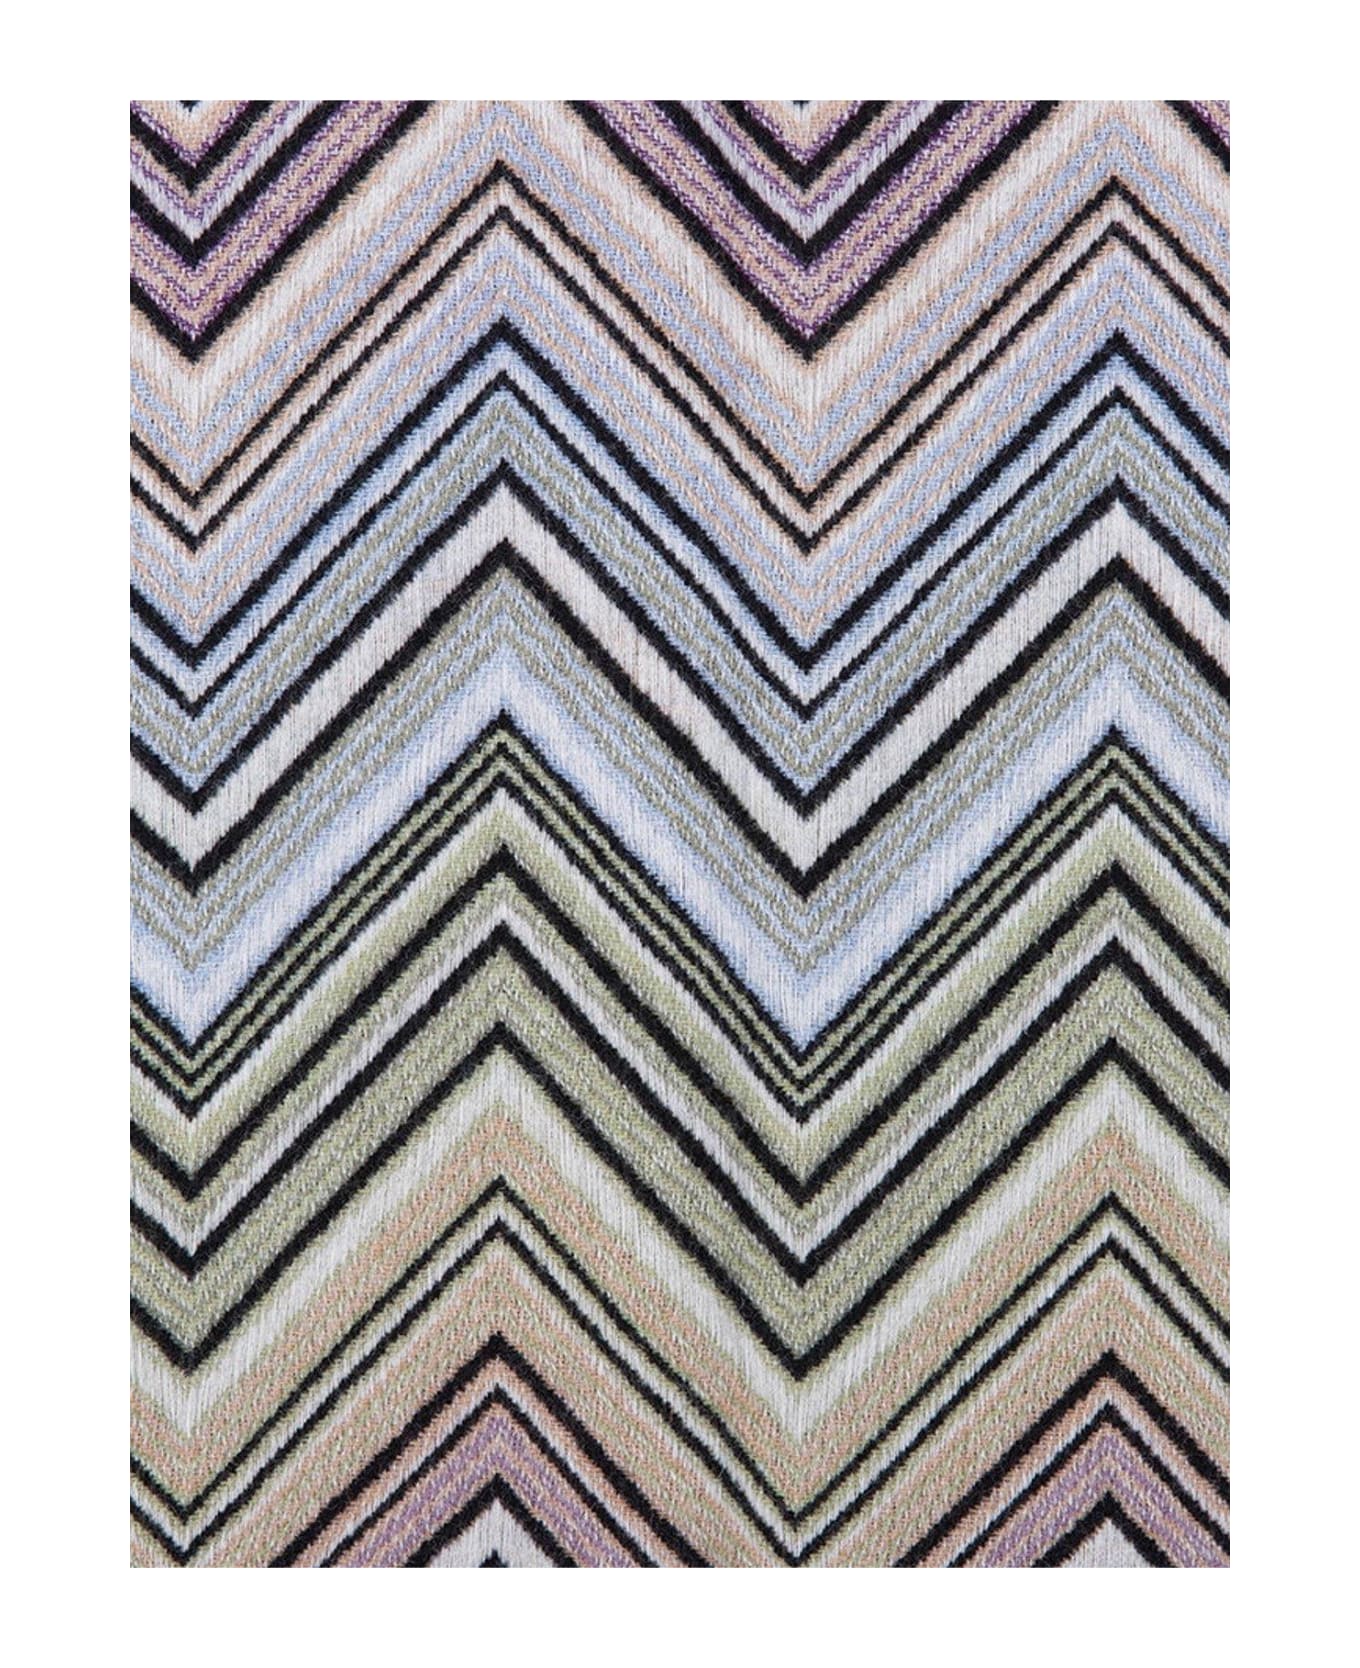 Missoni Perseo Zig-zag Patterned Throw - BLUE/GREEN